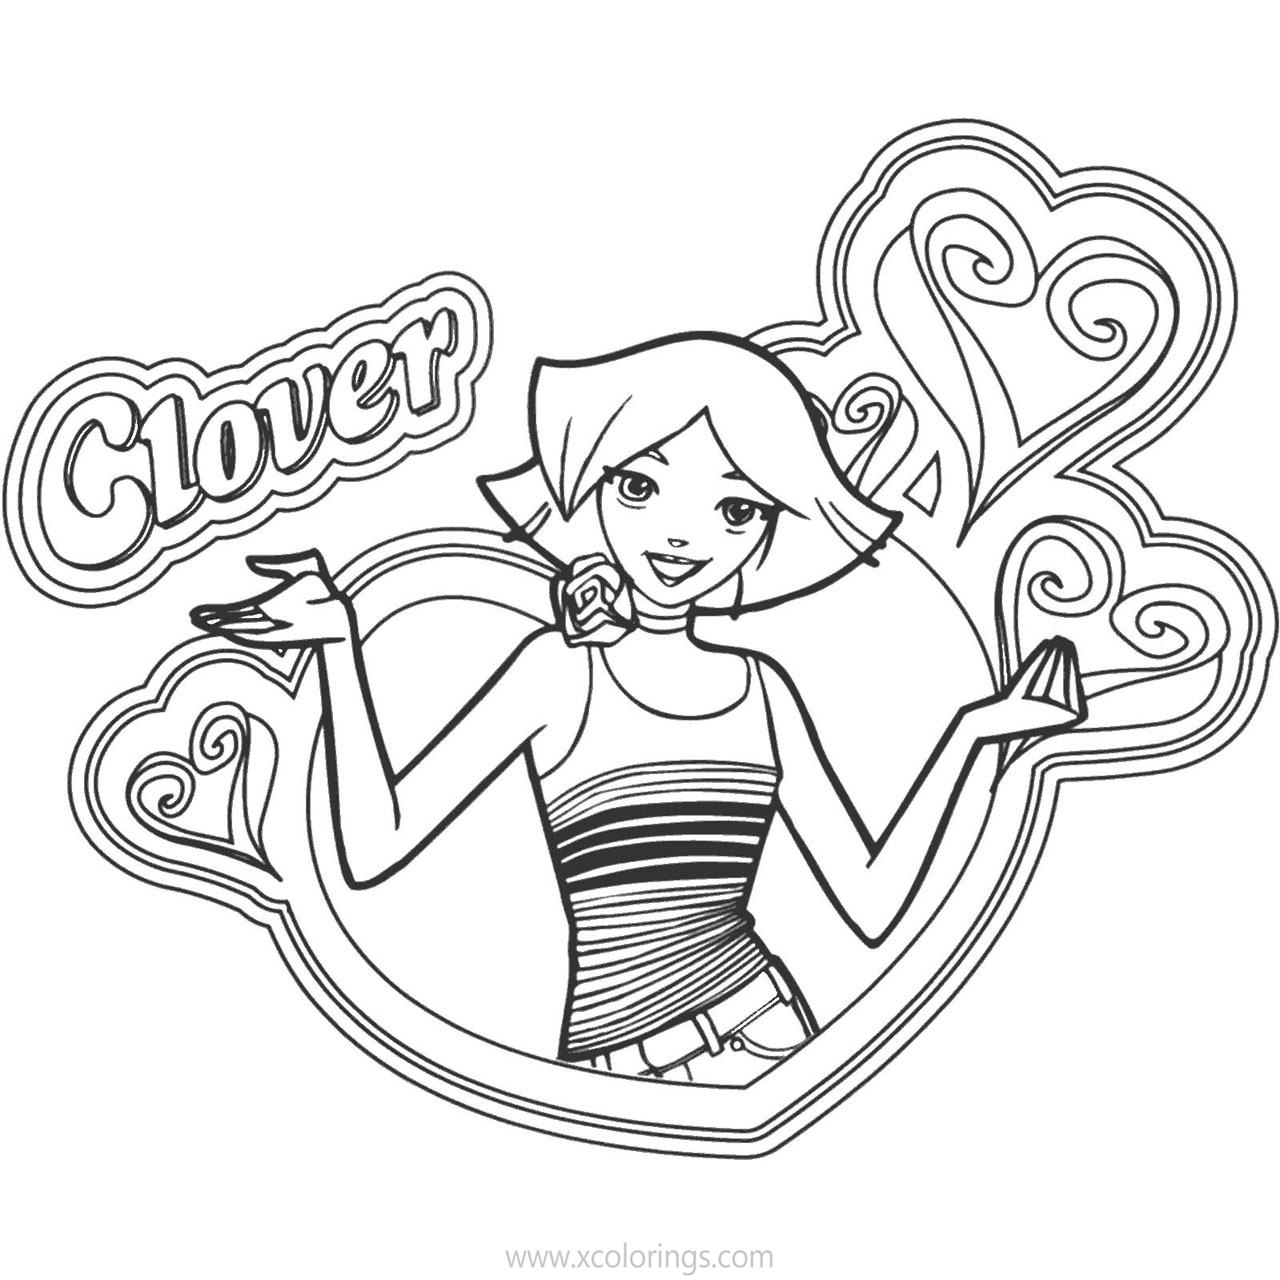 Free Totally Spies Coloring Pages Clover printable